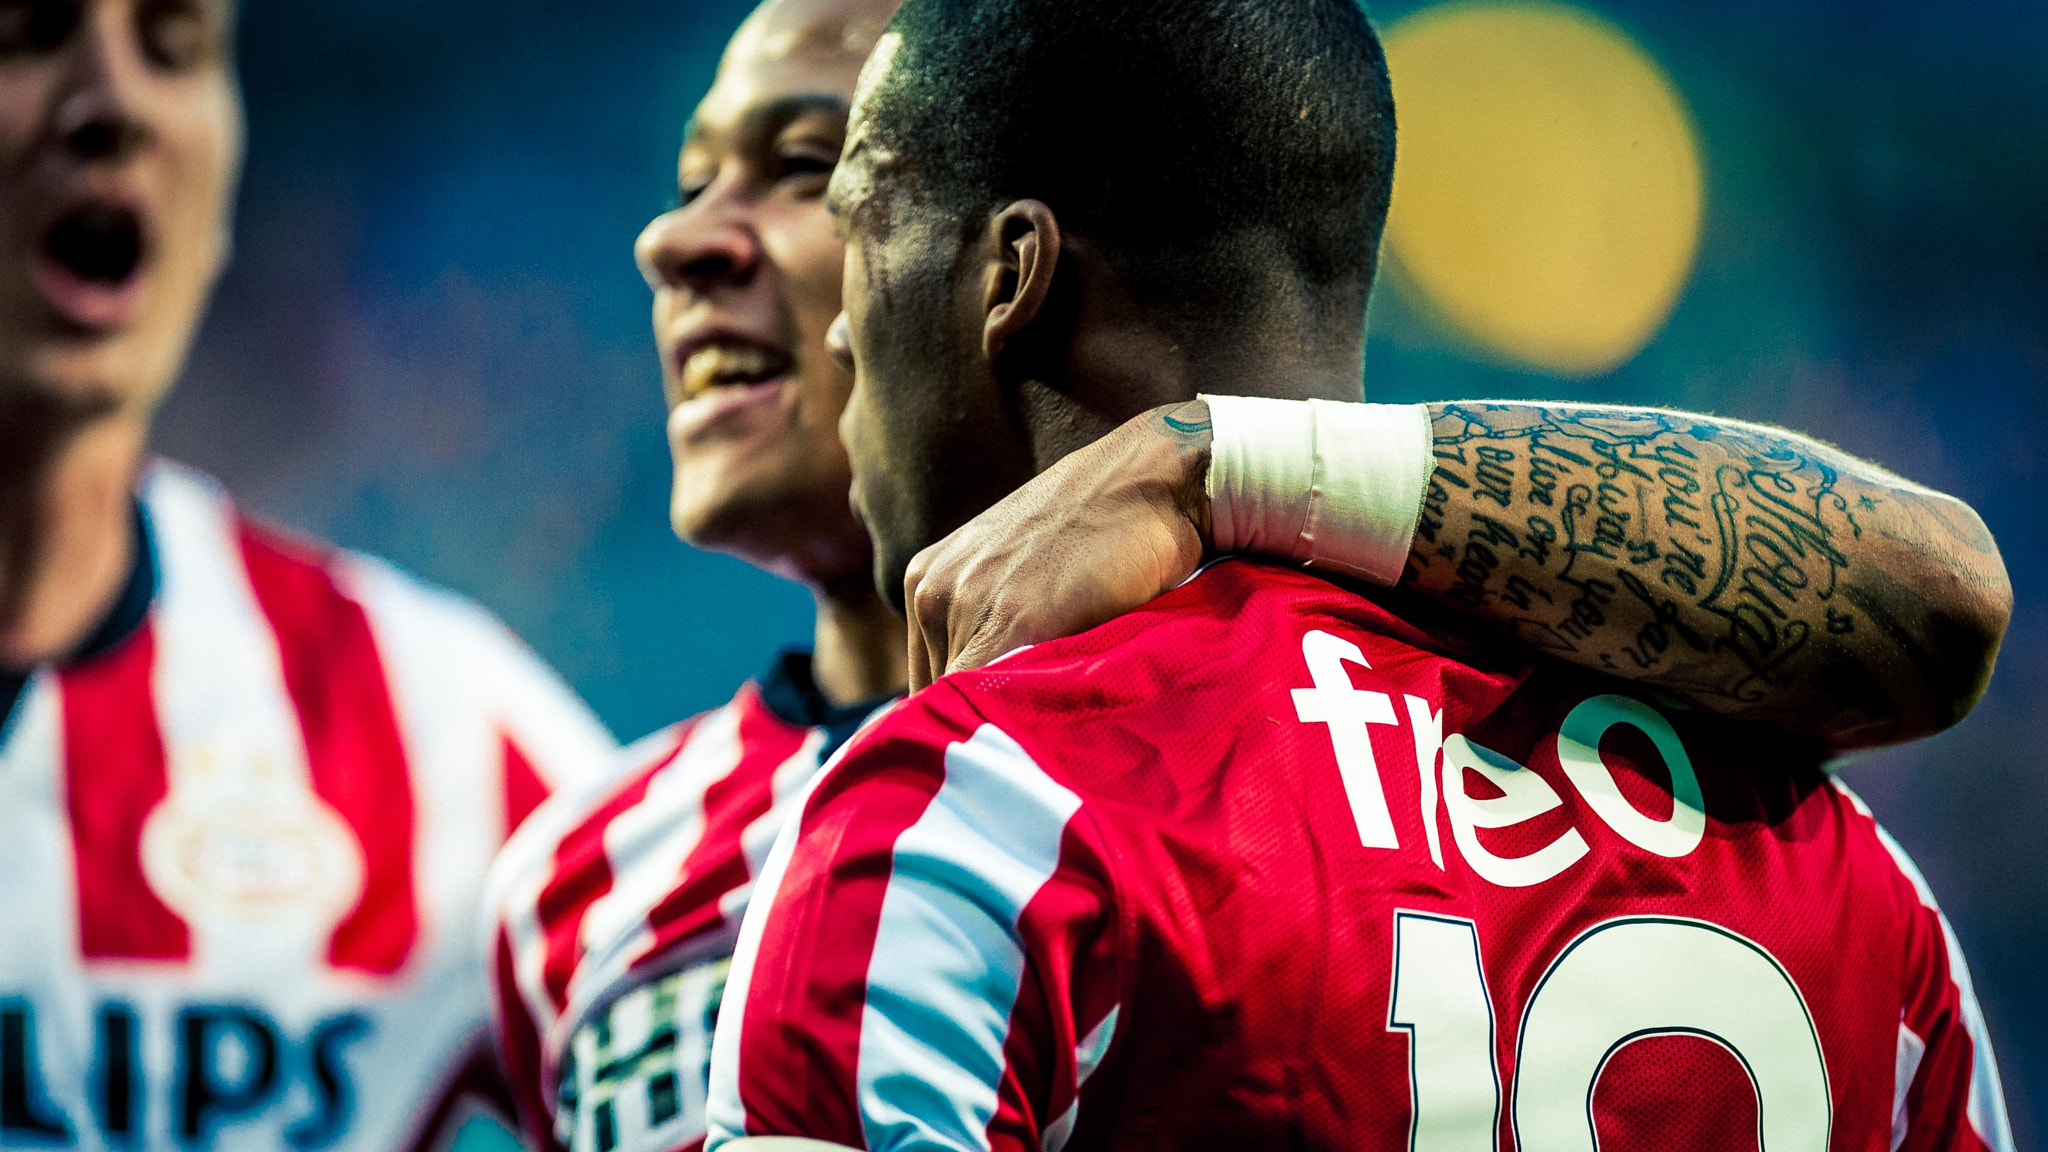 PSV - close and intense moments